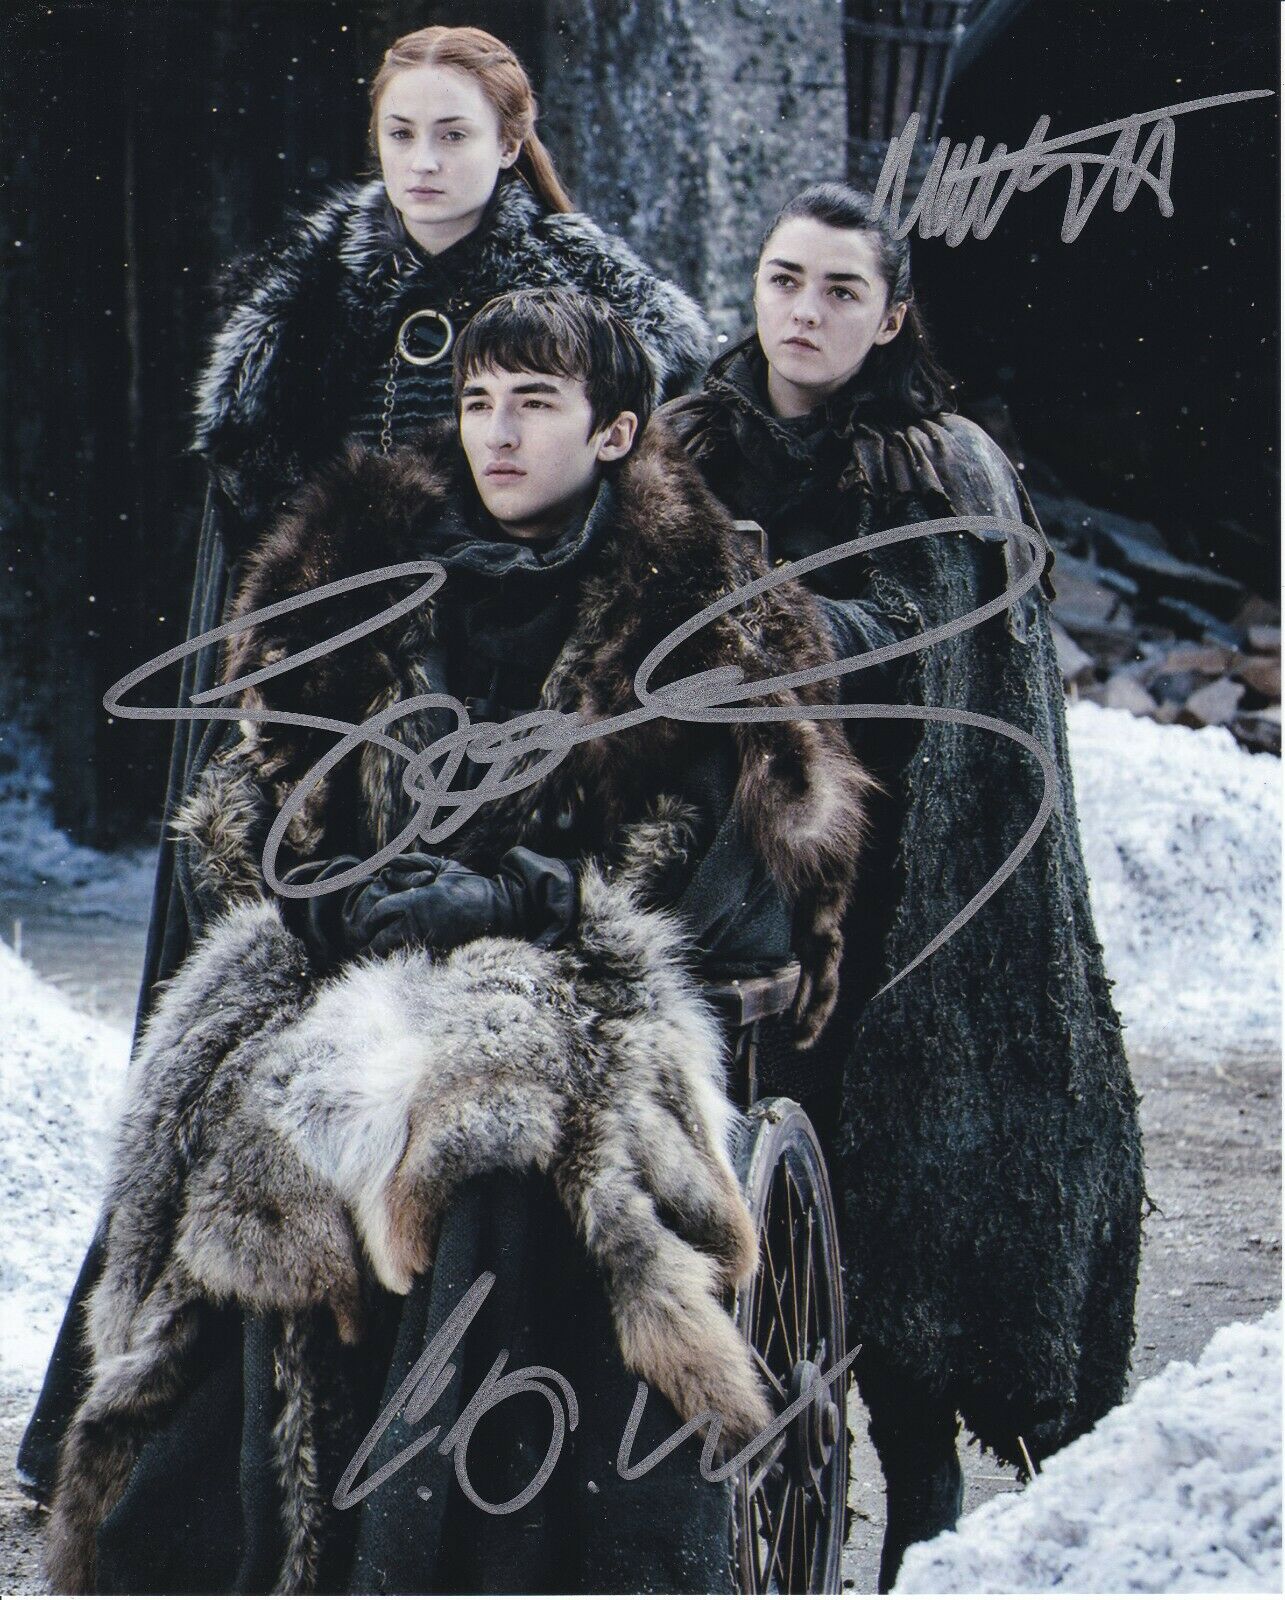 Sophie Turner Maisie Williams Issac Hepsteaf GOT autographed 8x10 photograph RP